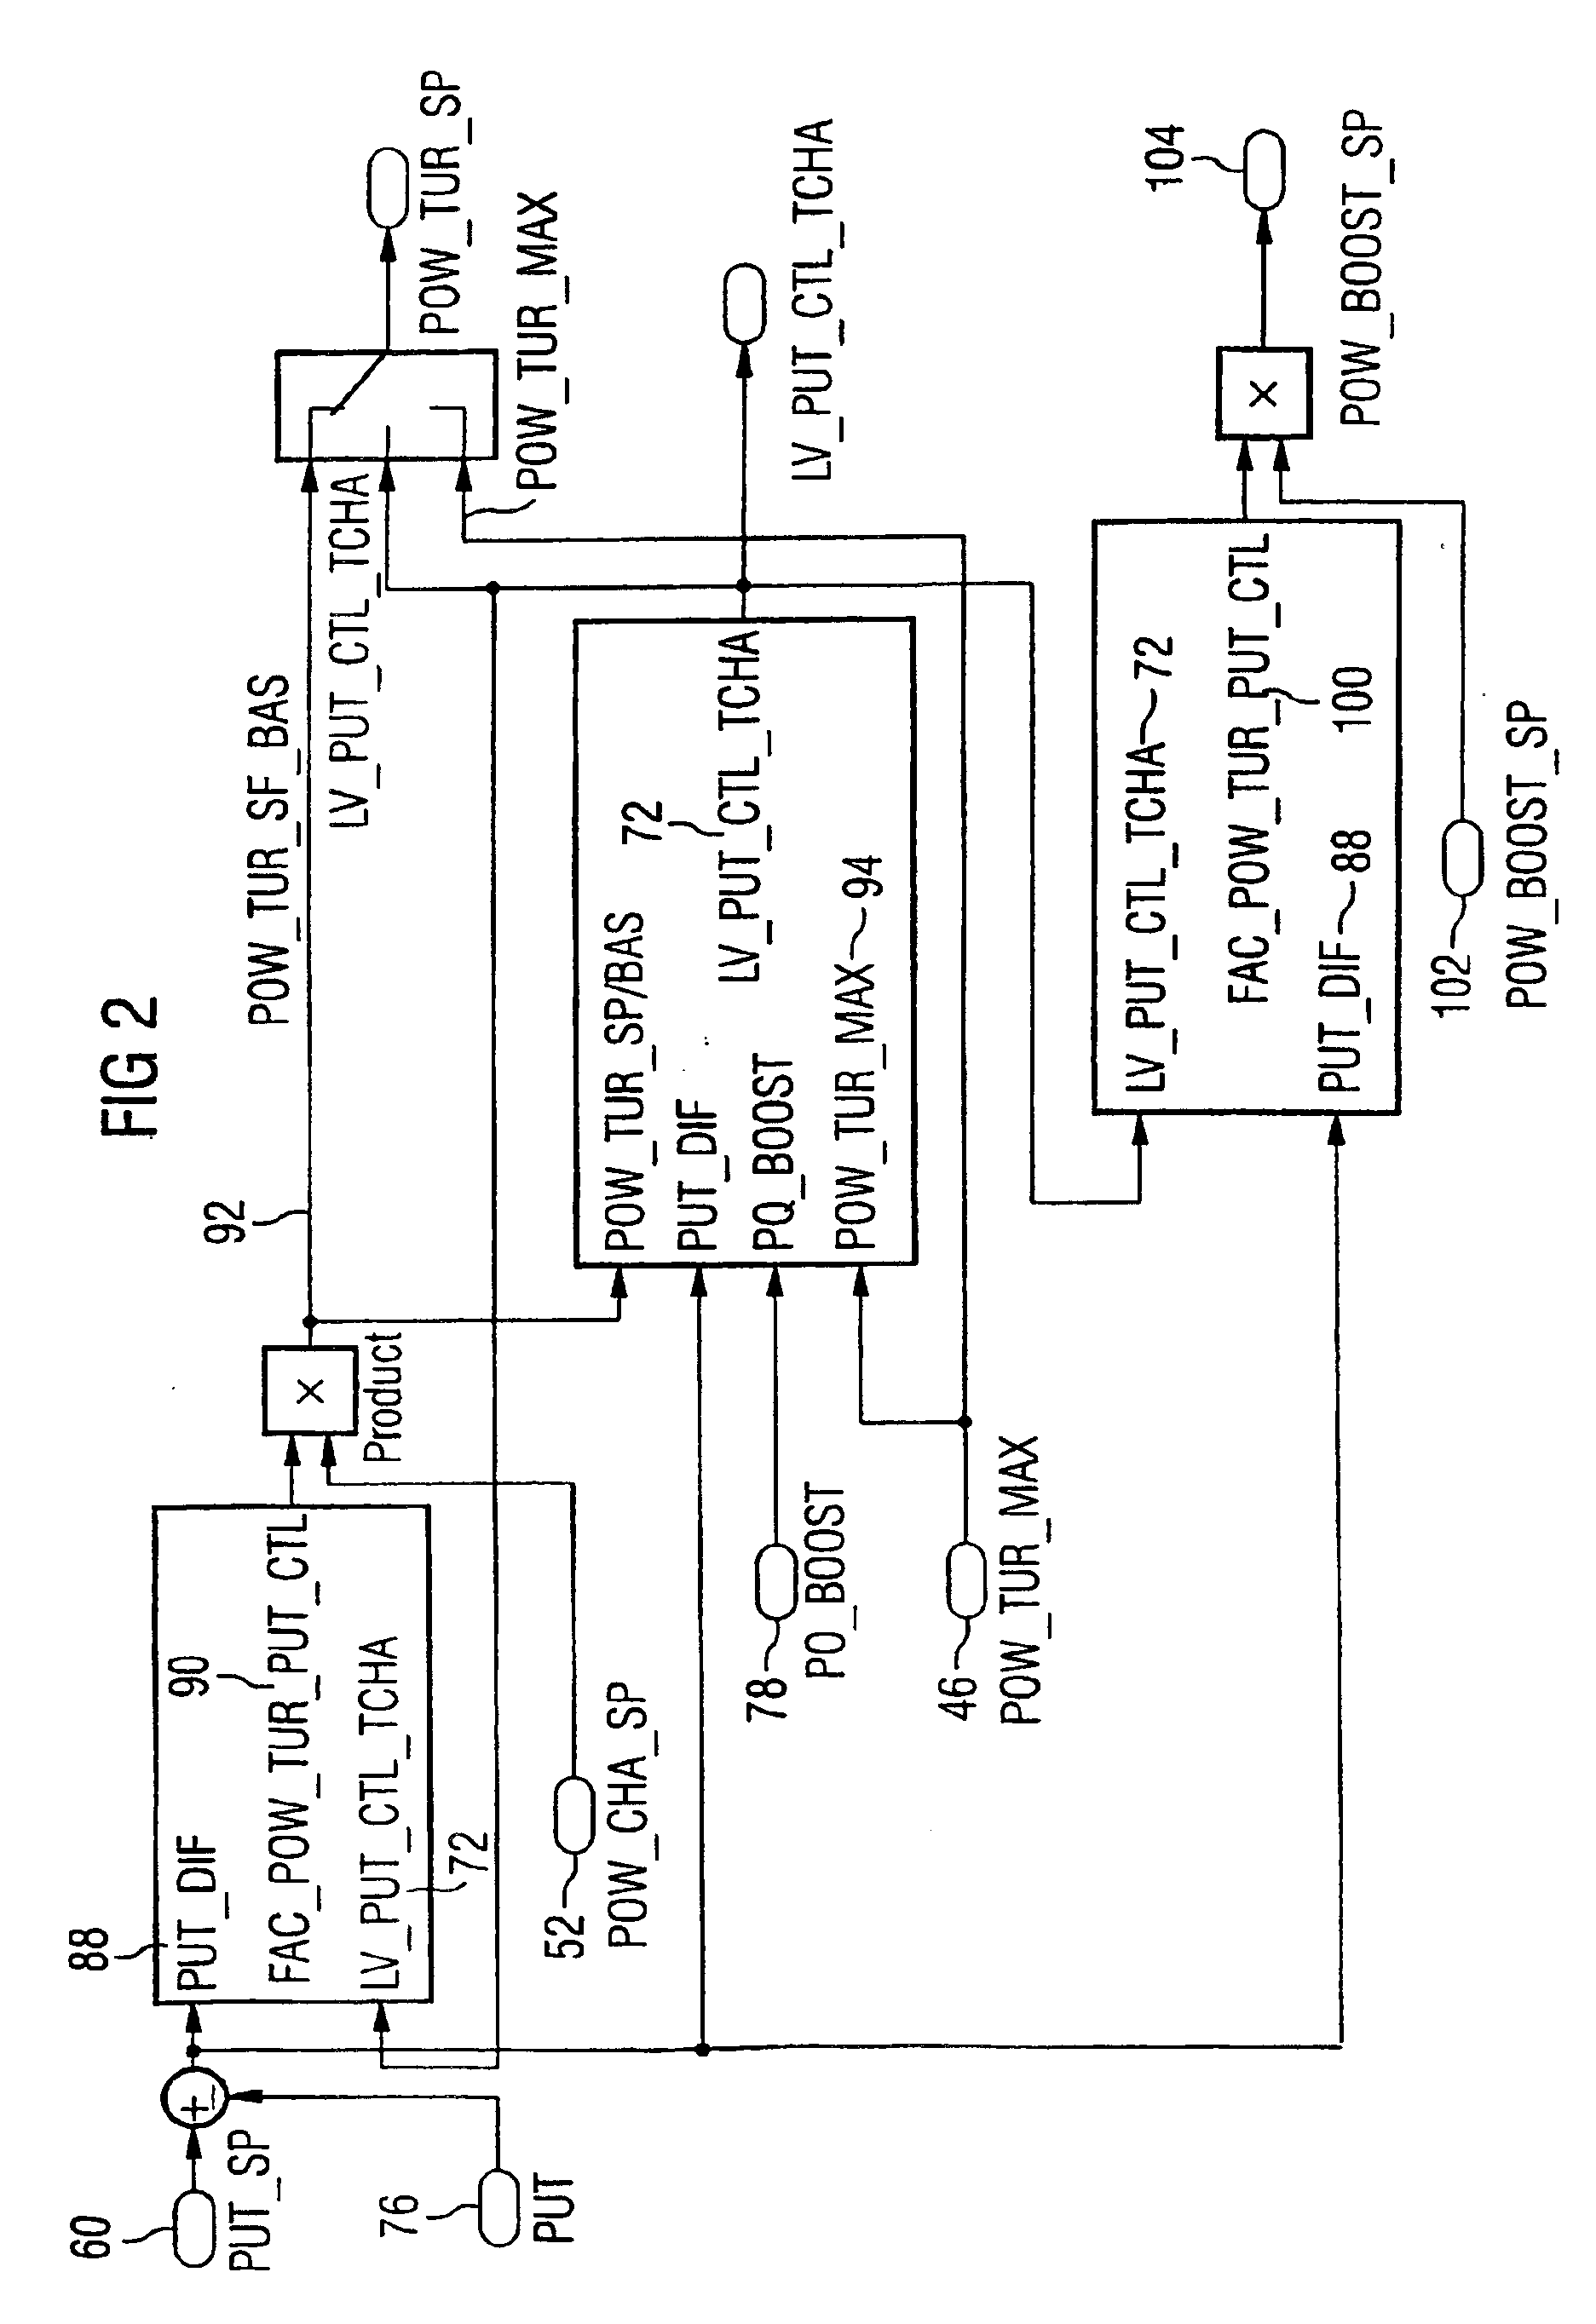 Method for controlling an electrically driven compressor